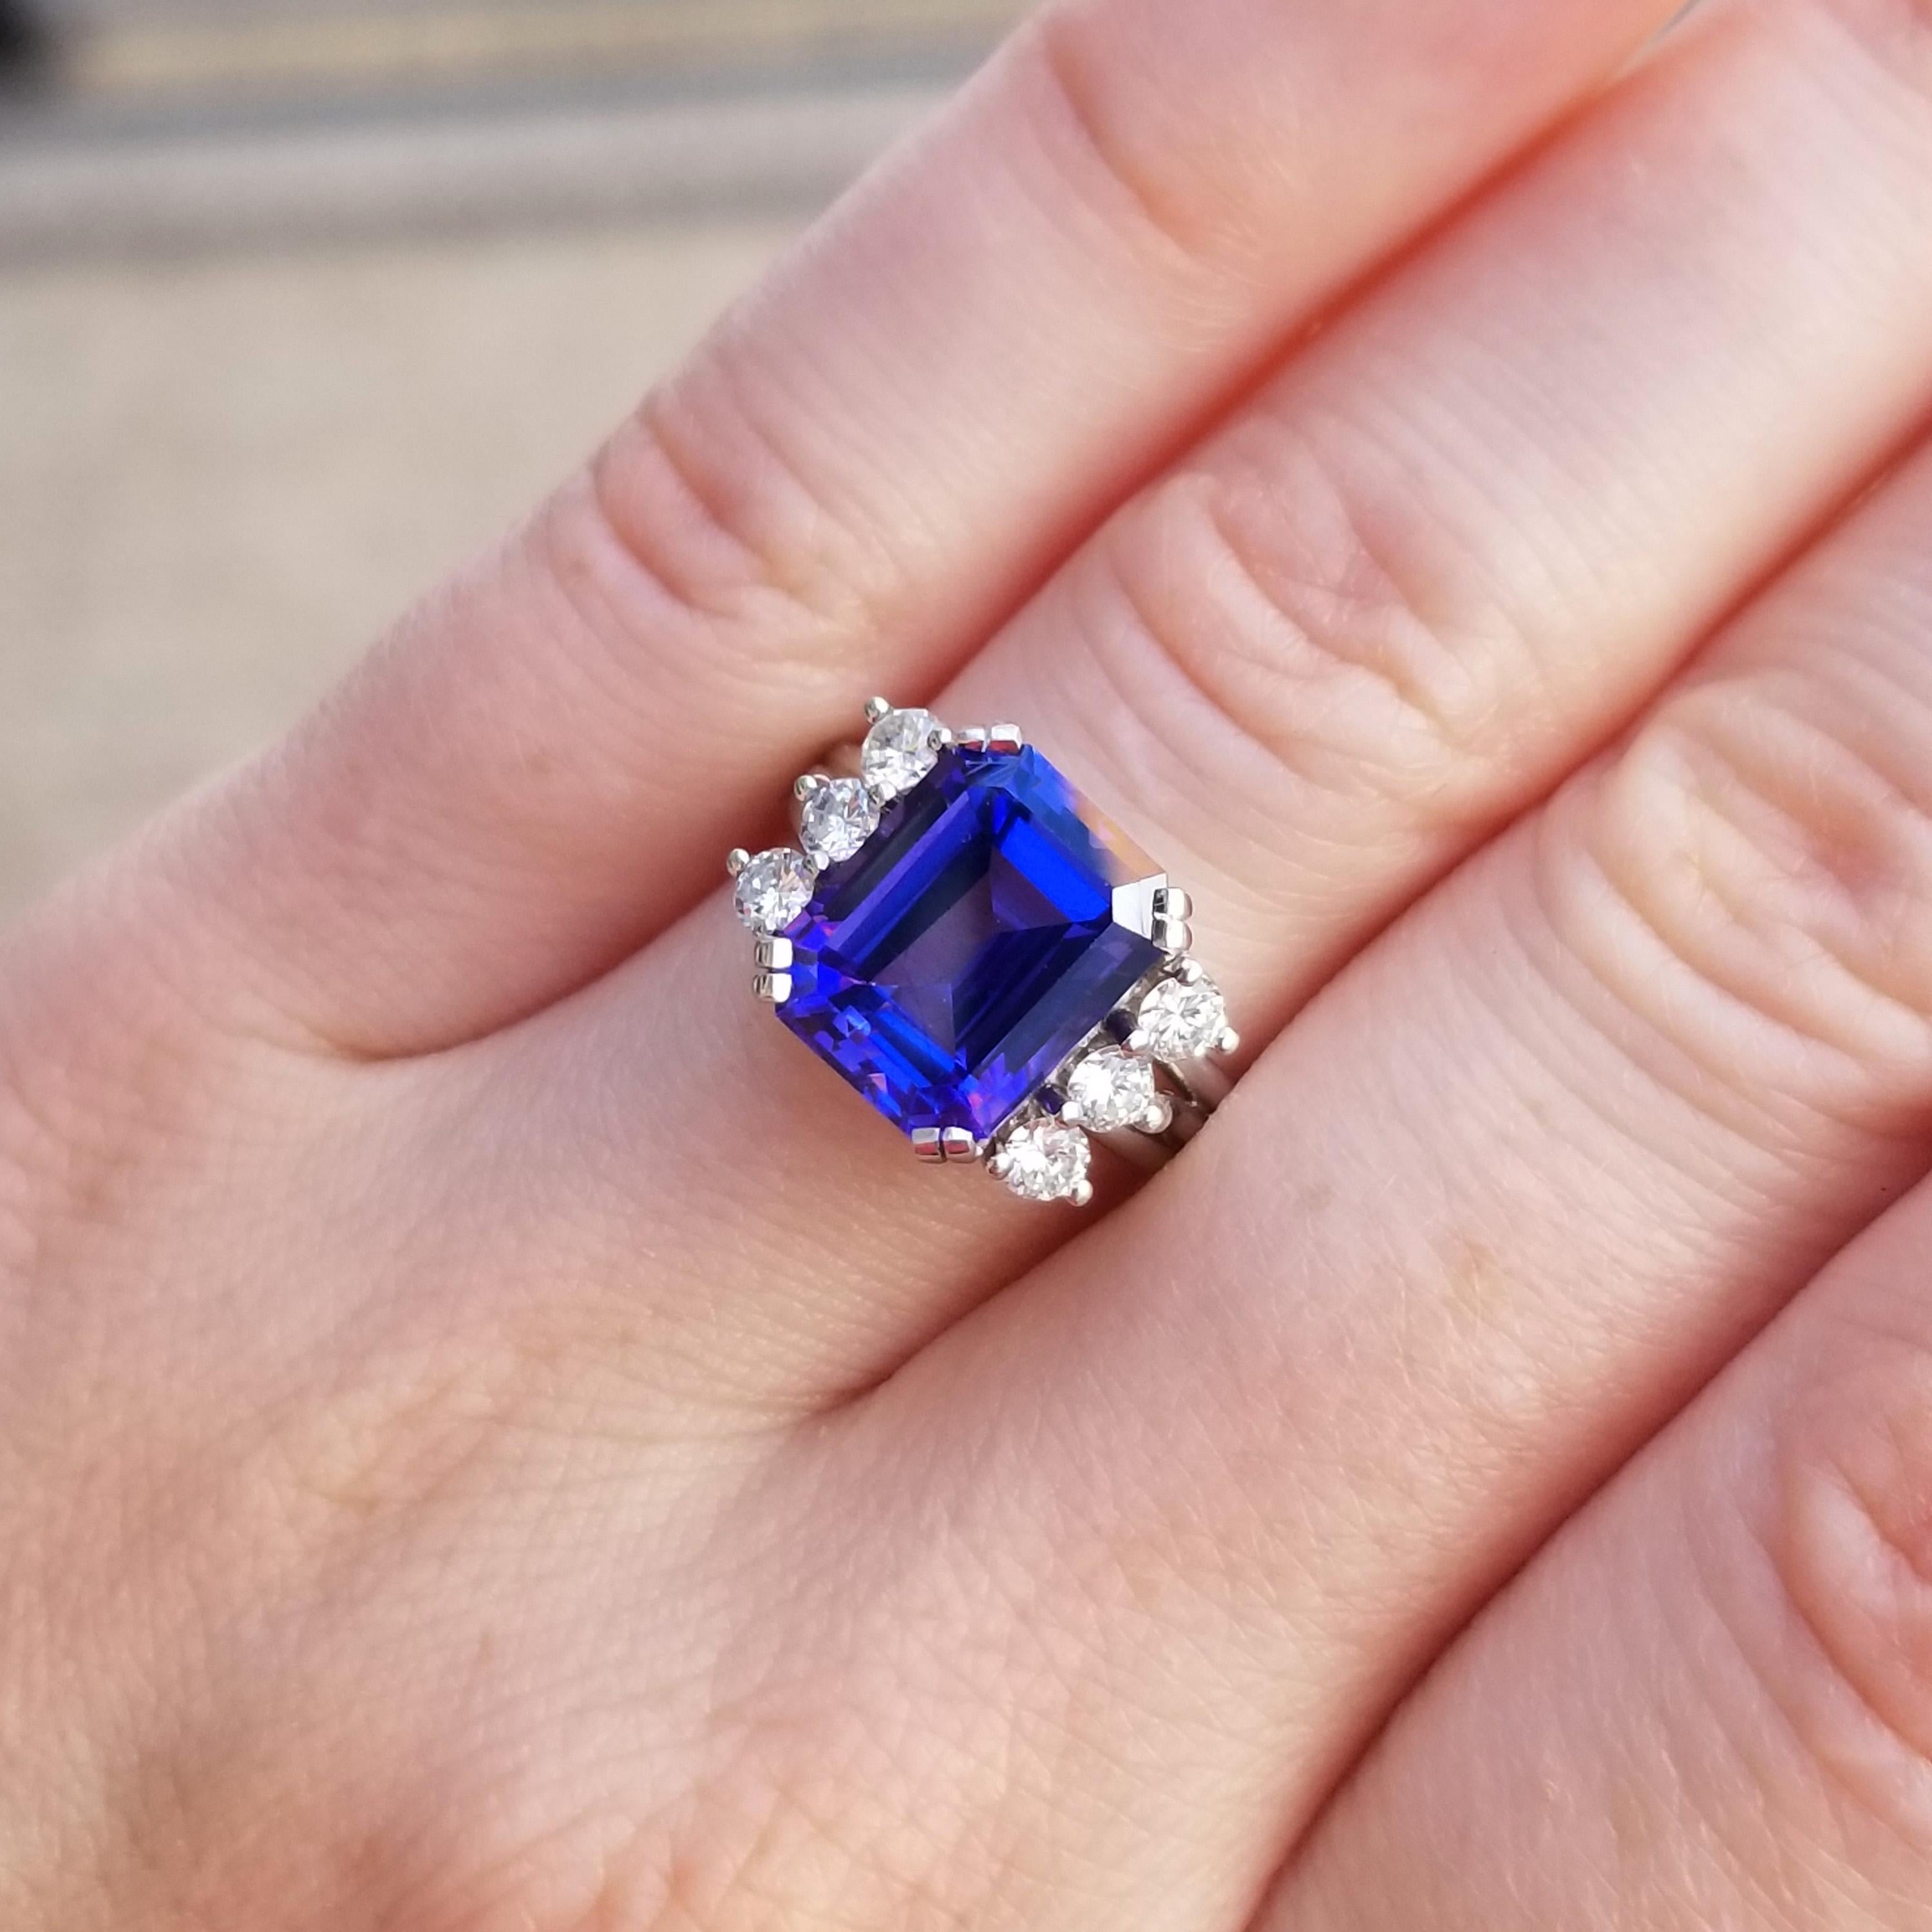 This custom made platinum and diamond ring is a timeless frame for this gorgeous 4.85ct tanzanite. The beautifully cut gemstone shows blue, purple, and flashes of red.

What is especially interesting is that the gem was purchased from a dealer in